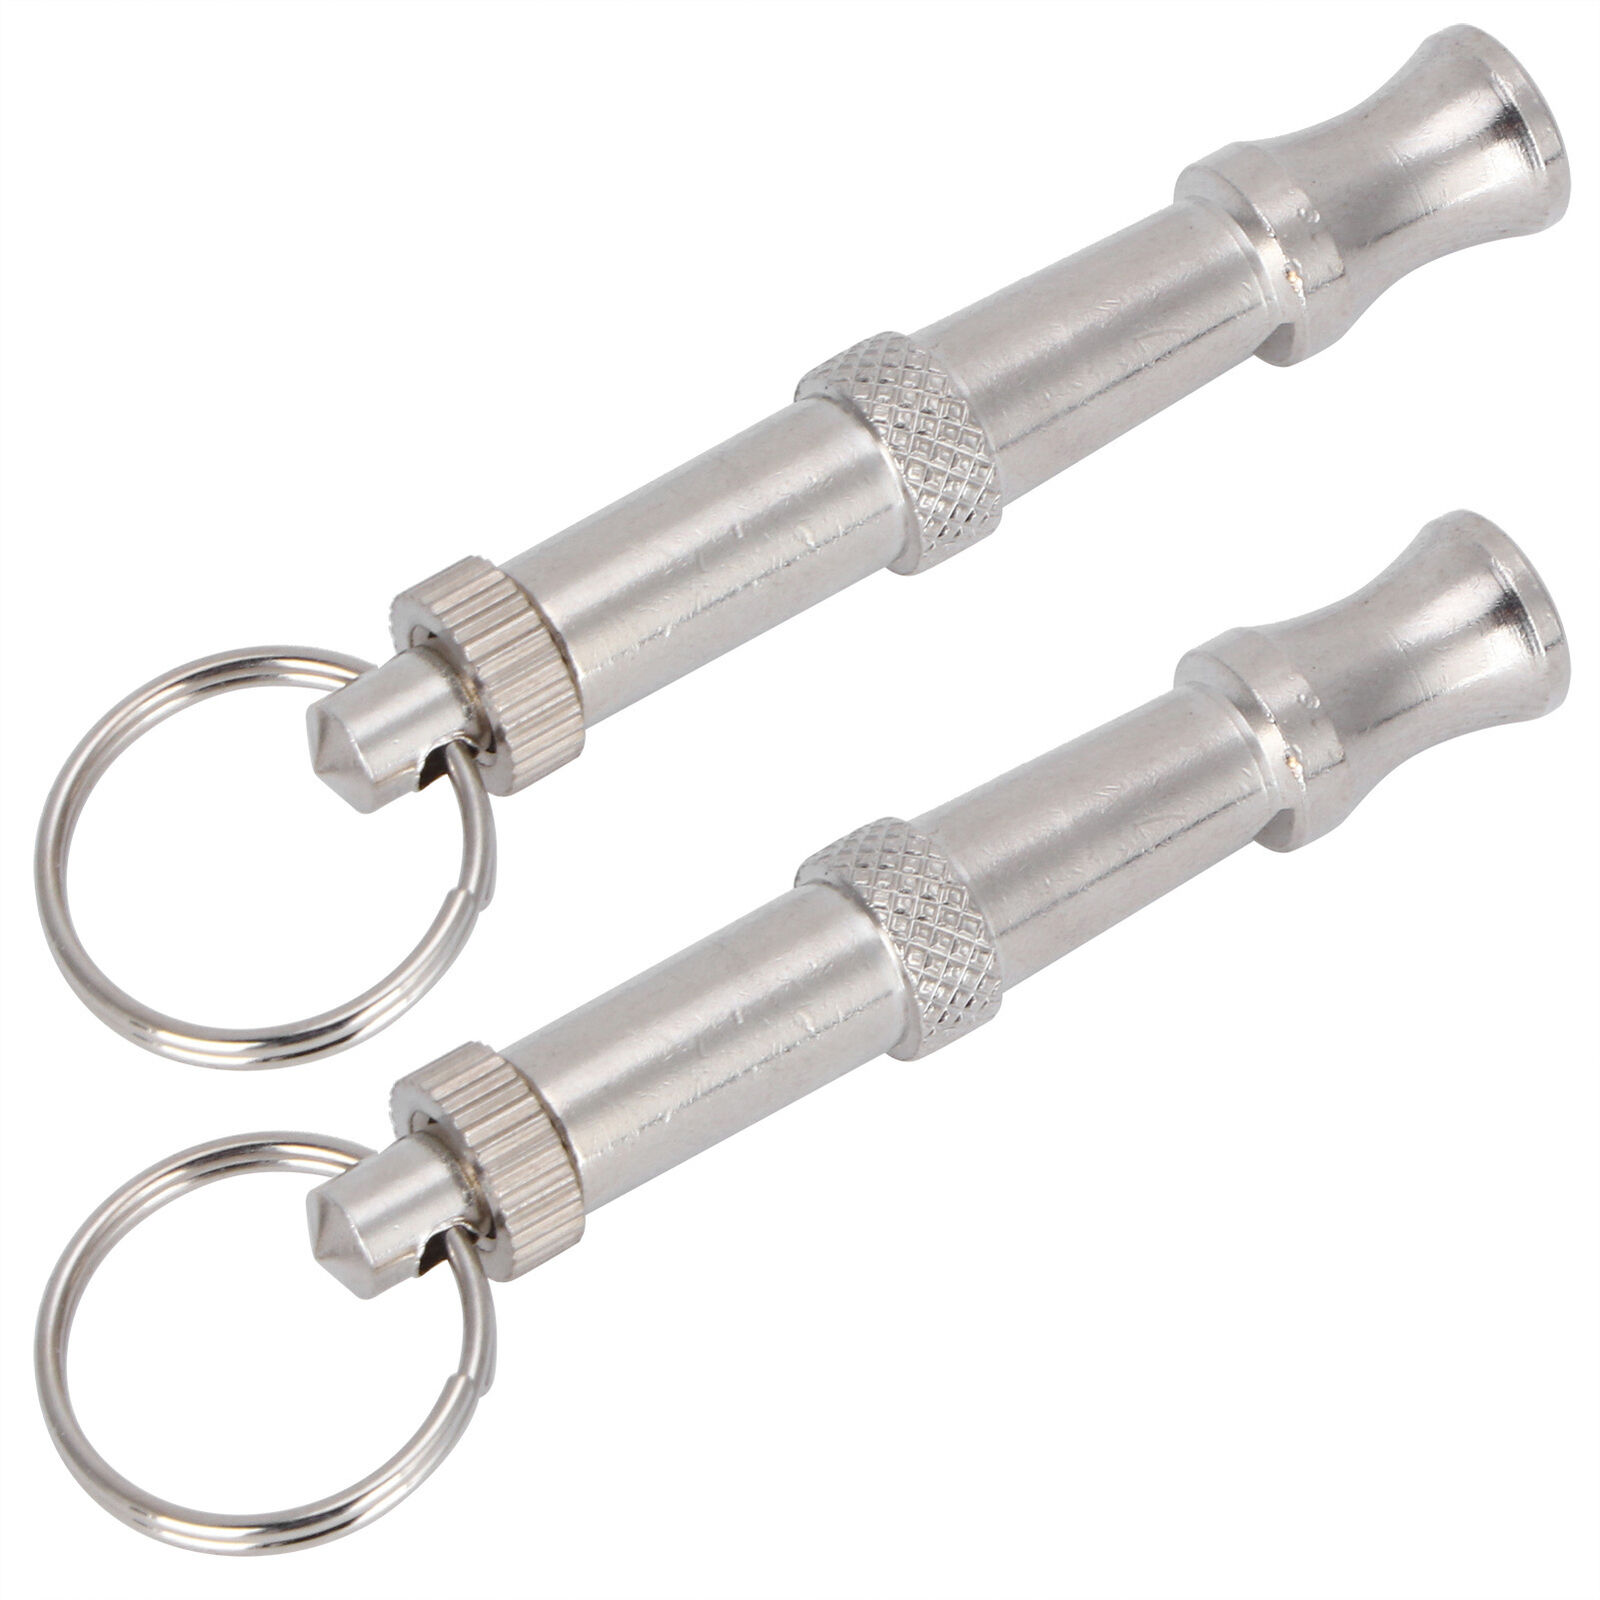 2pcs Stainless Steel Ultrasonic Whistle Portable Trainer Training Tool For FD